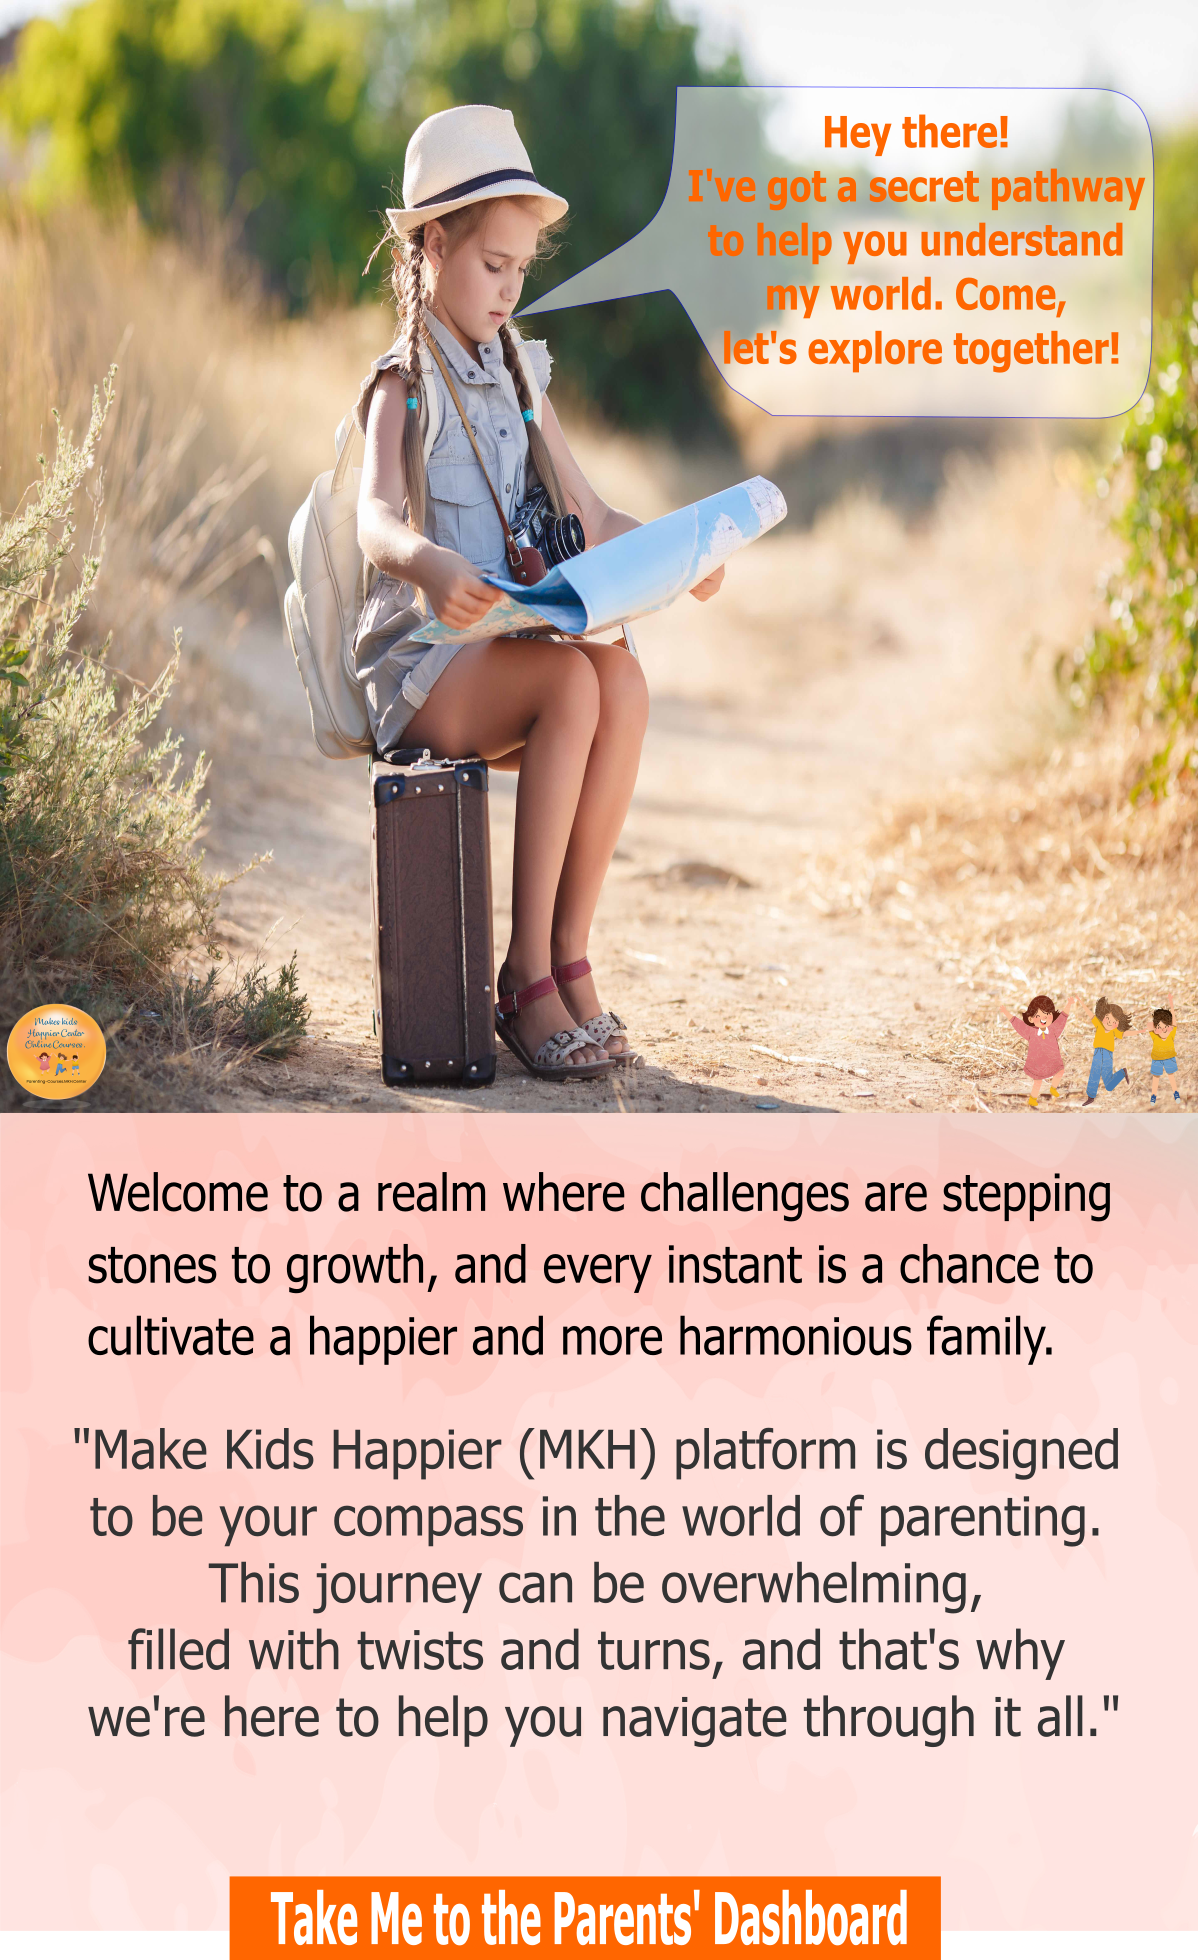 Welcome to a realm where challenges are stepping stones to growth, and every instant is a chance to cultivate a happier and more harmonious family.